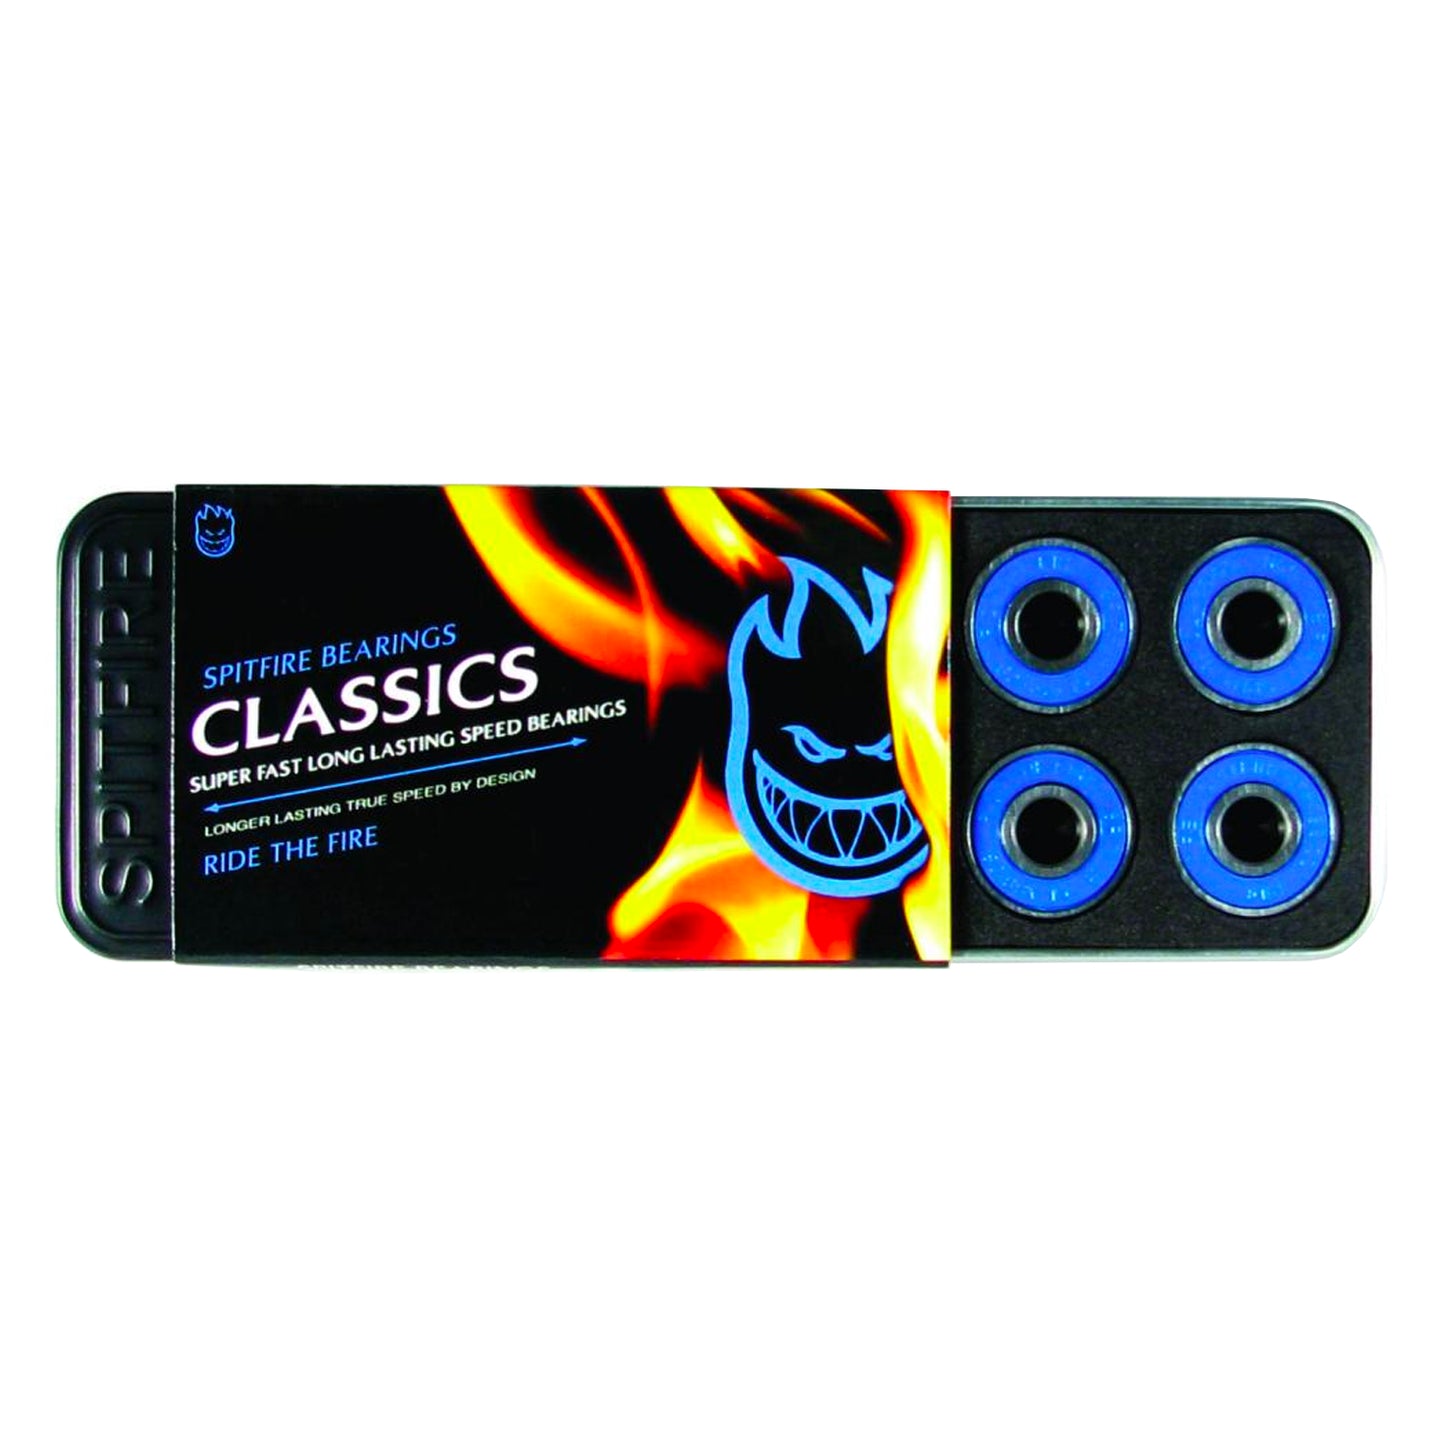 Spitfire Classics Bearings - Prime Delux Store